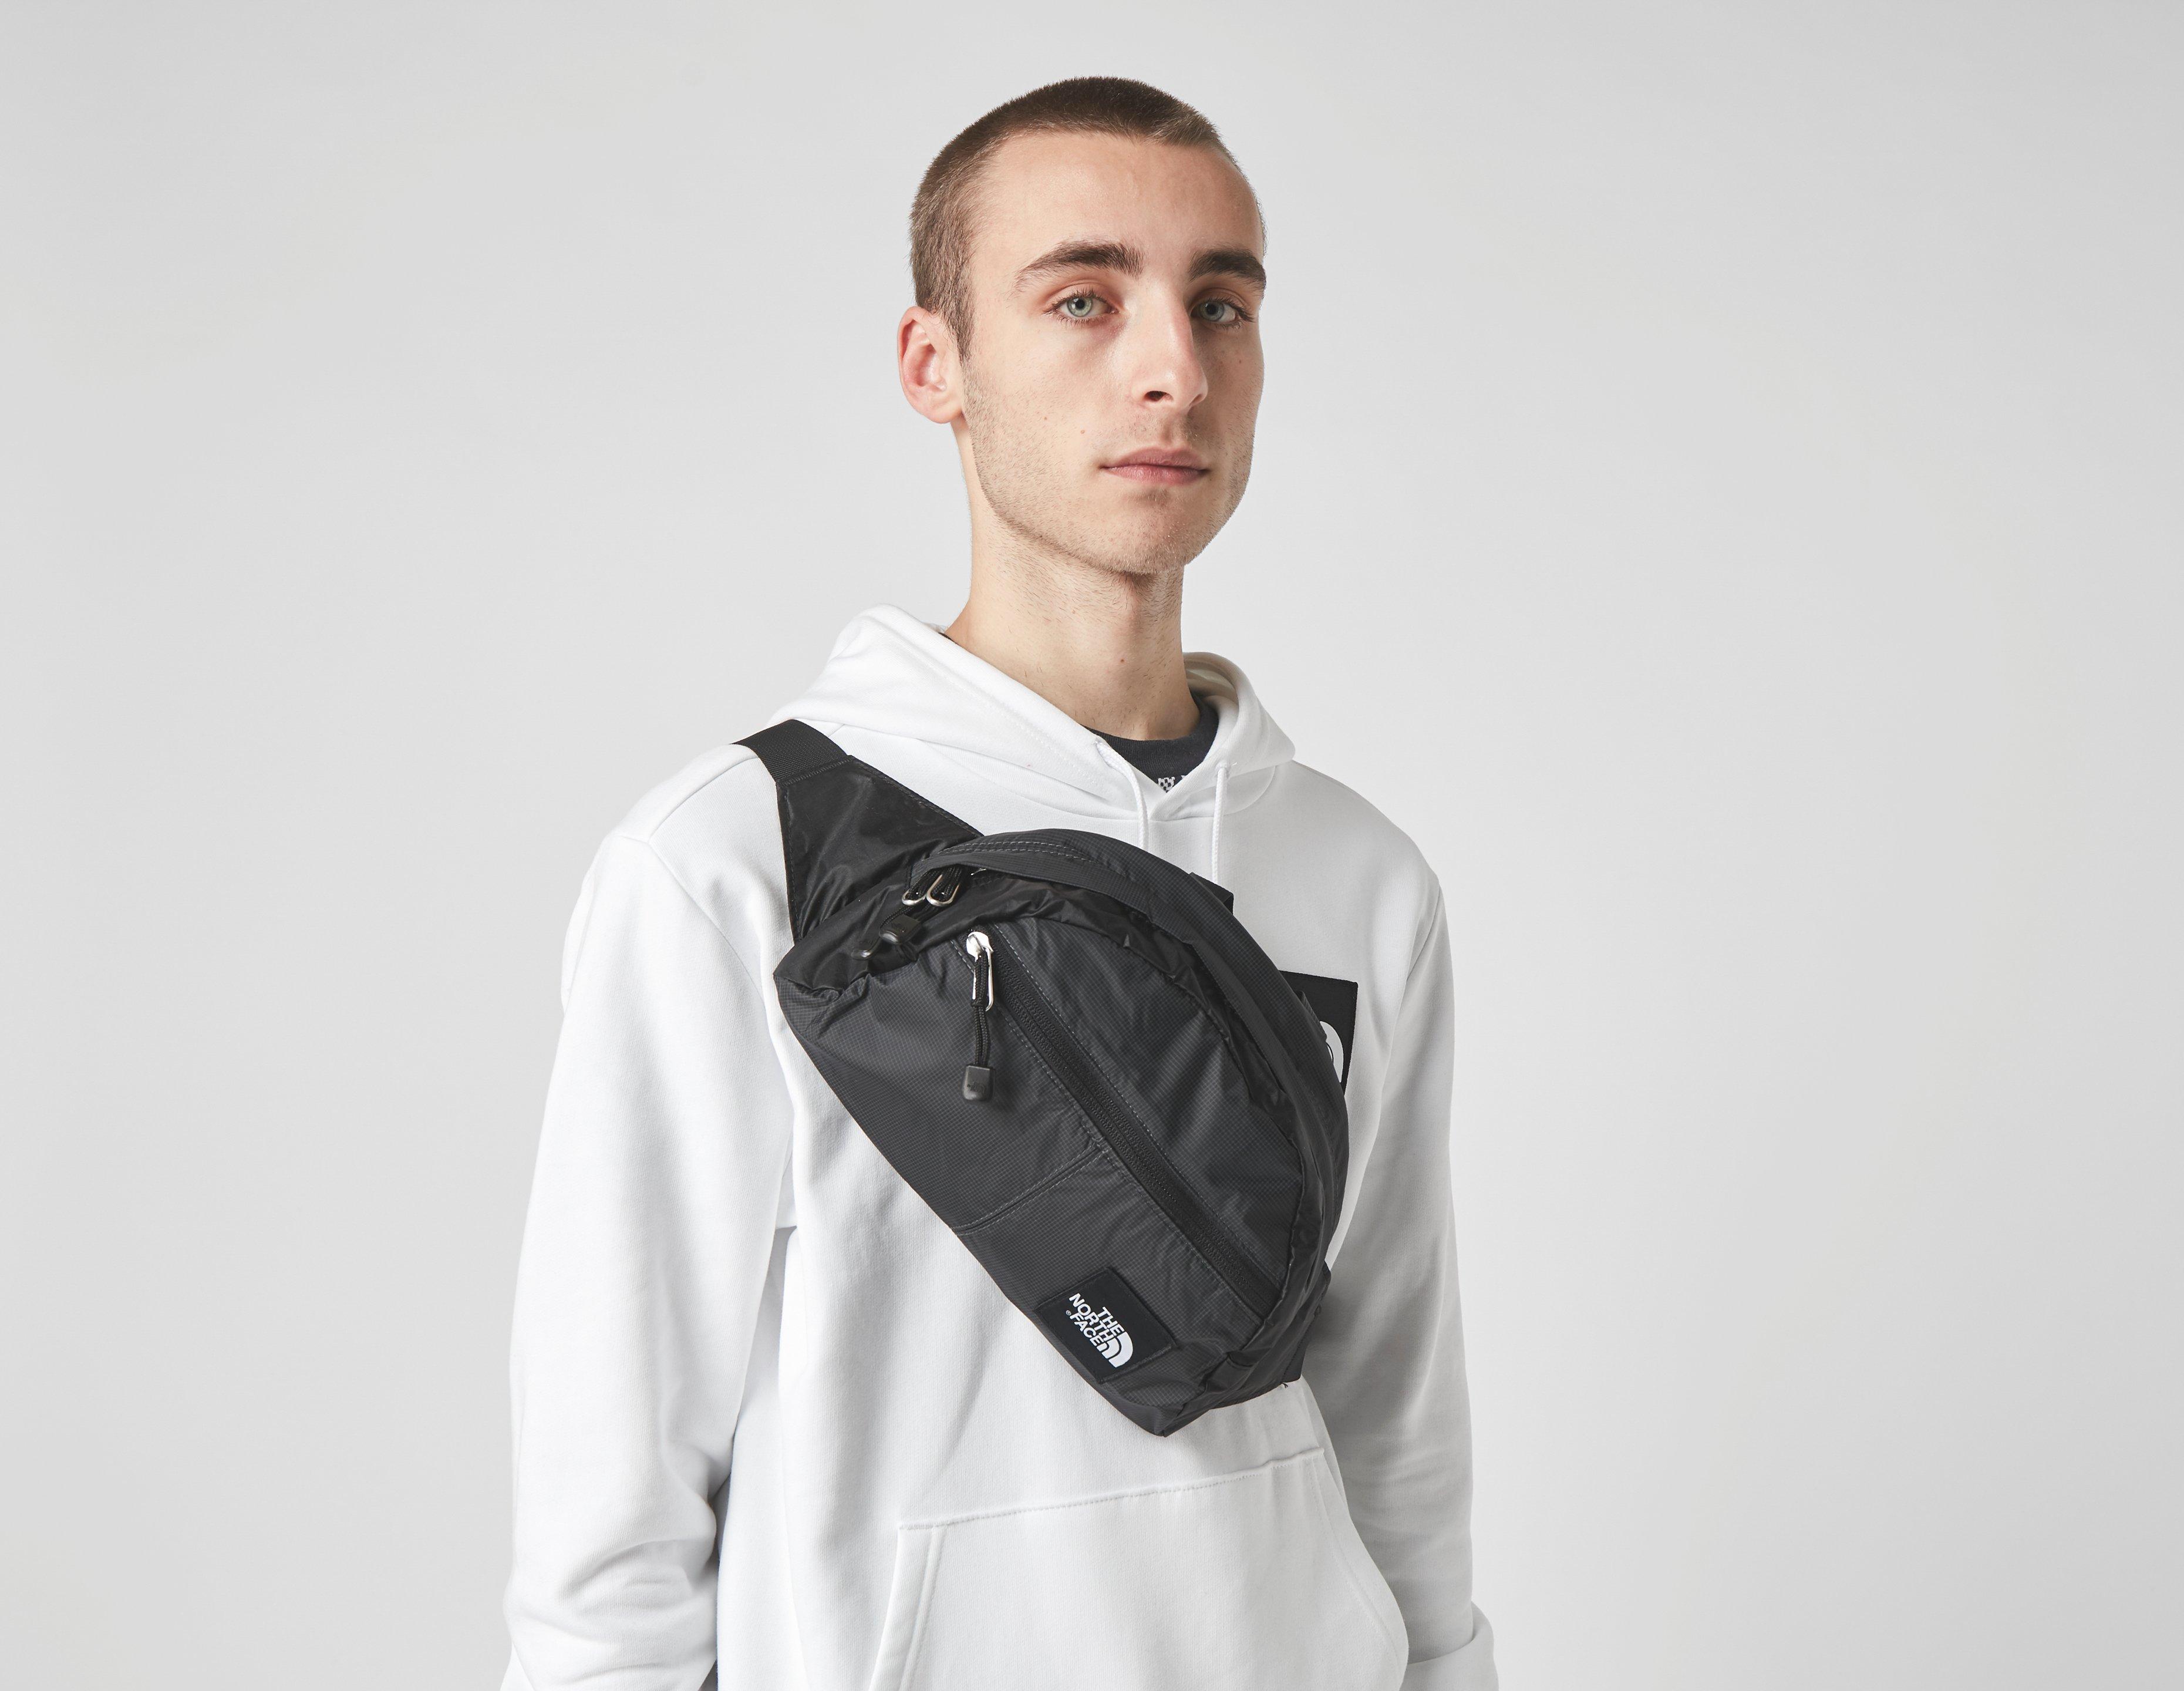 the north face roo lumbar pack